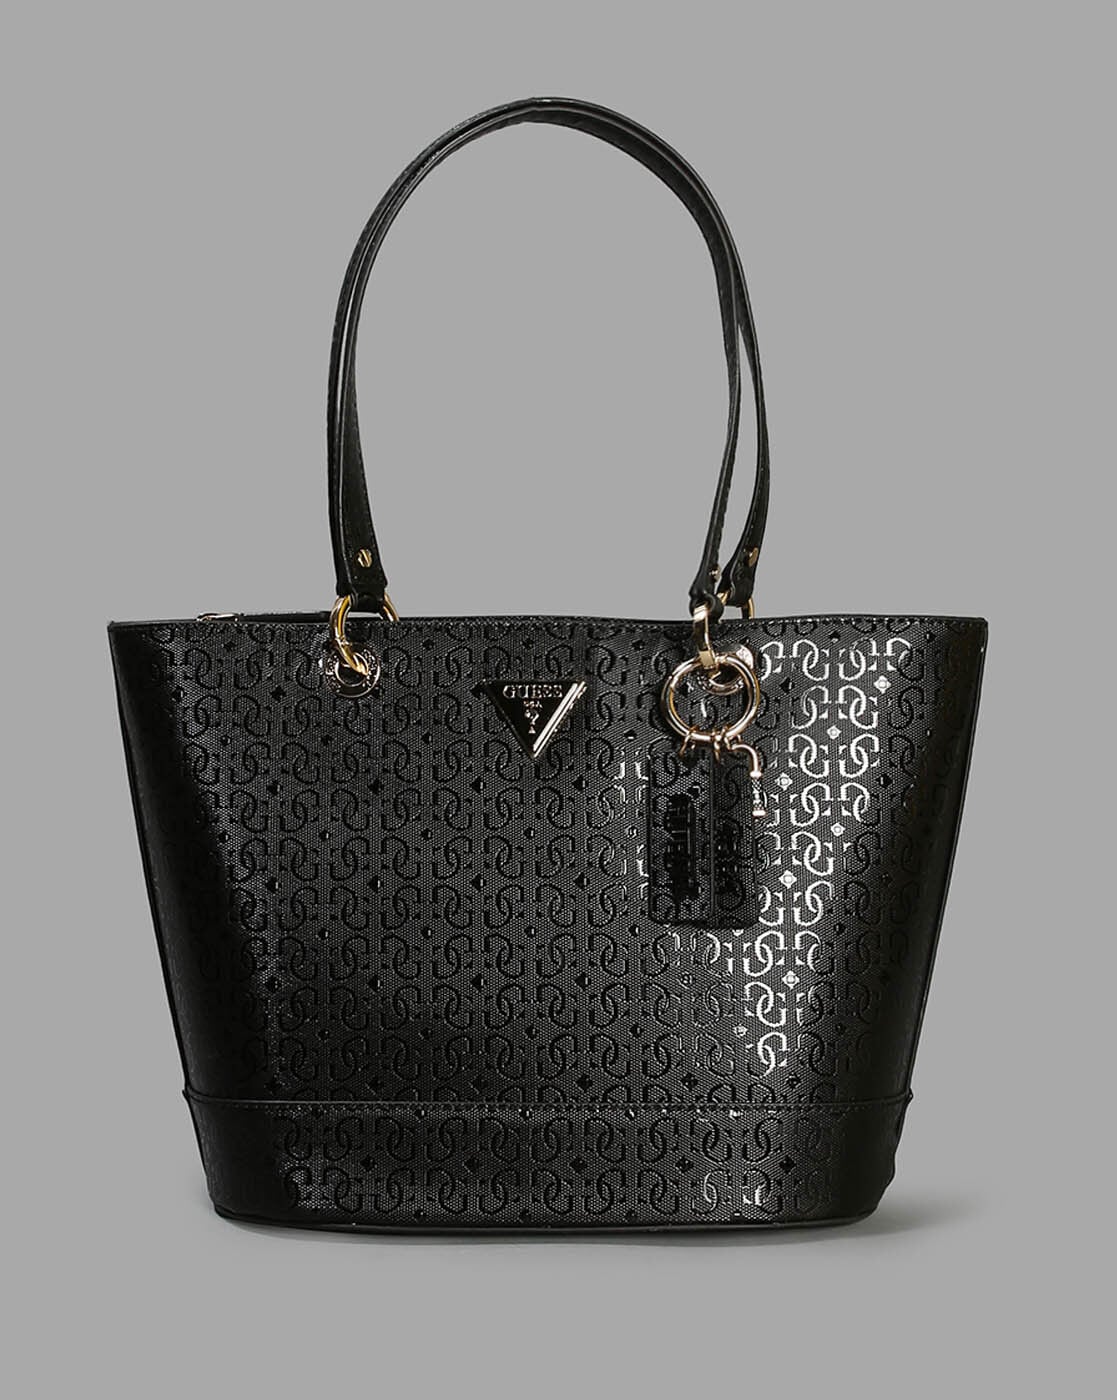 Guess Noelle Tote Bag | SportsDirect.com USA